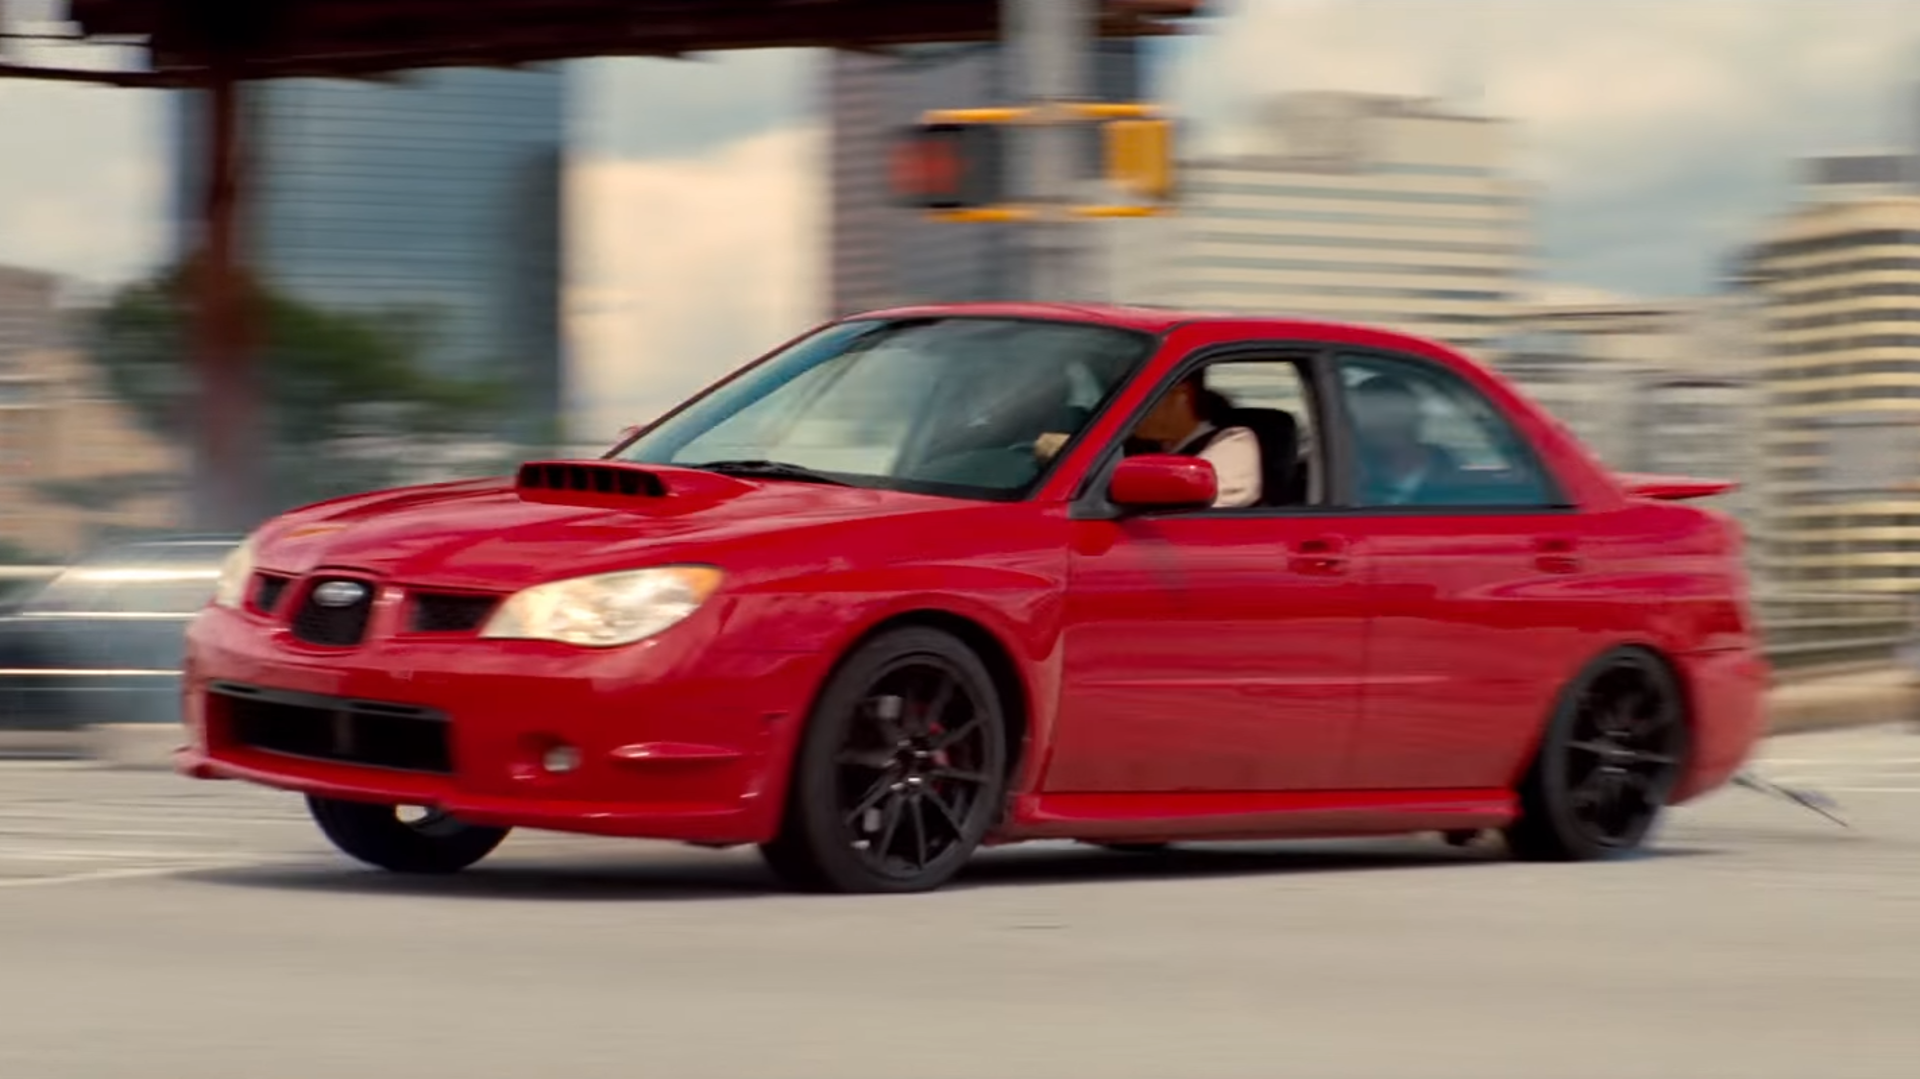 The Baby Driver WRX Ended Up Selling for $69,100